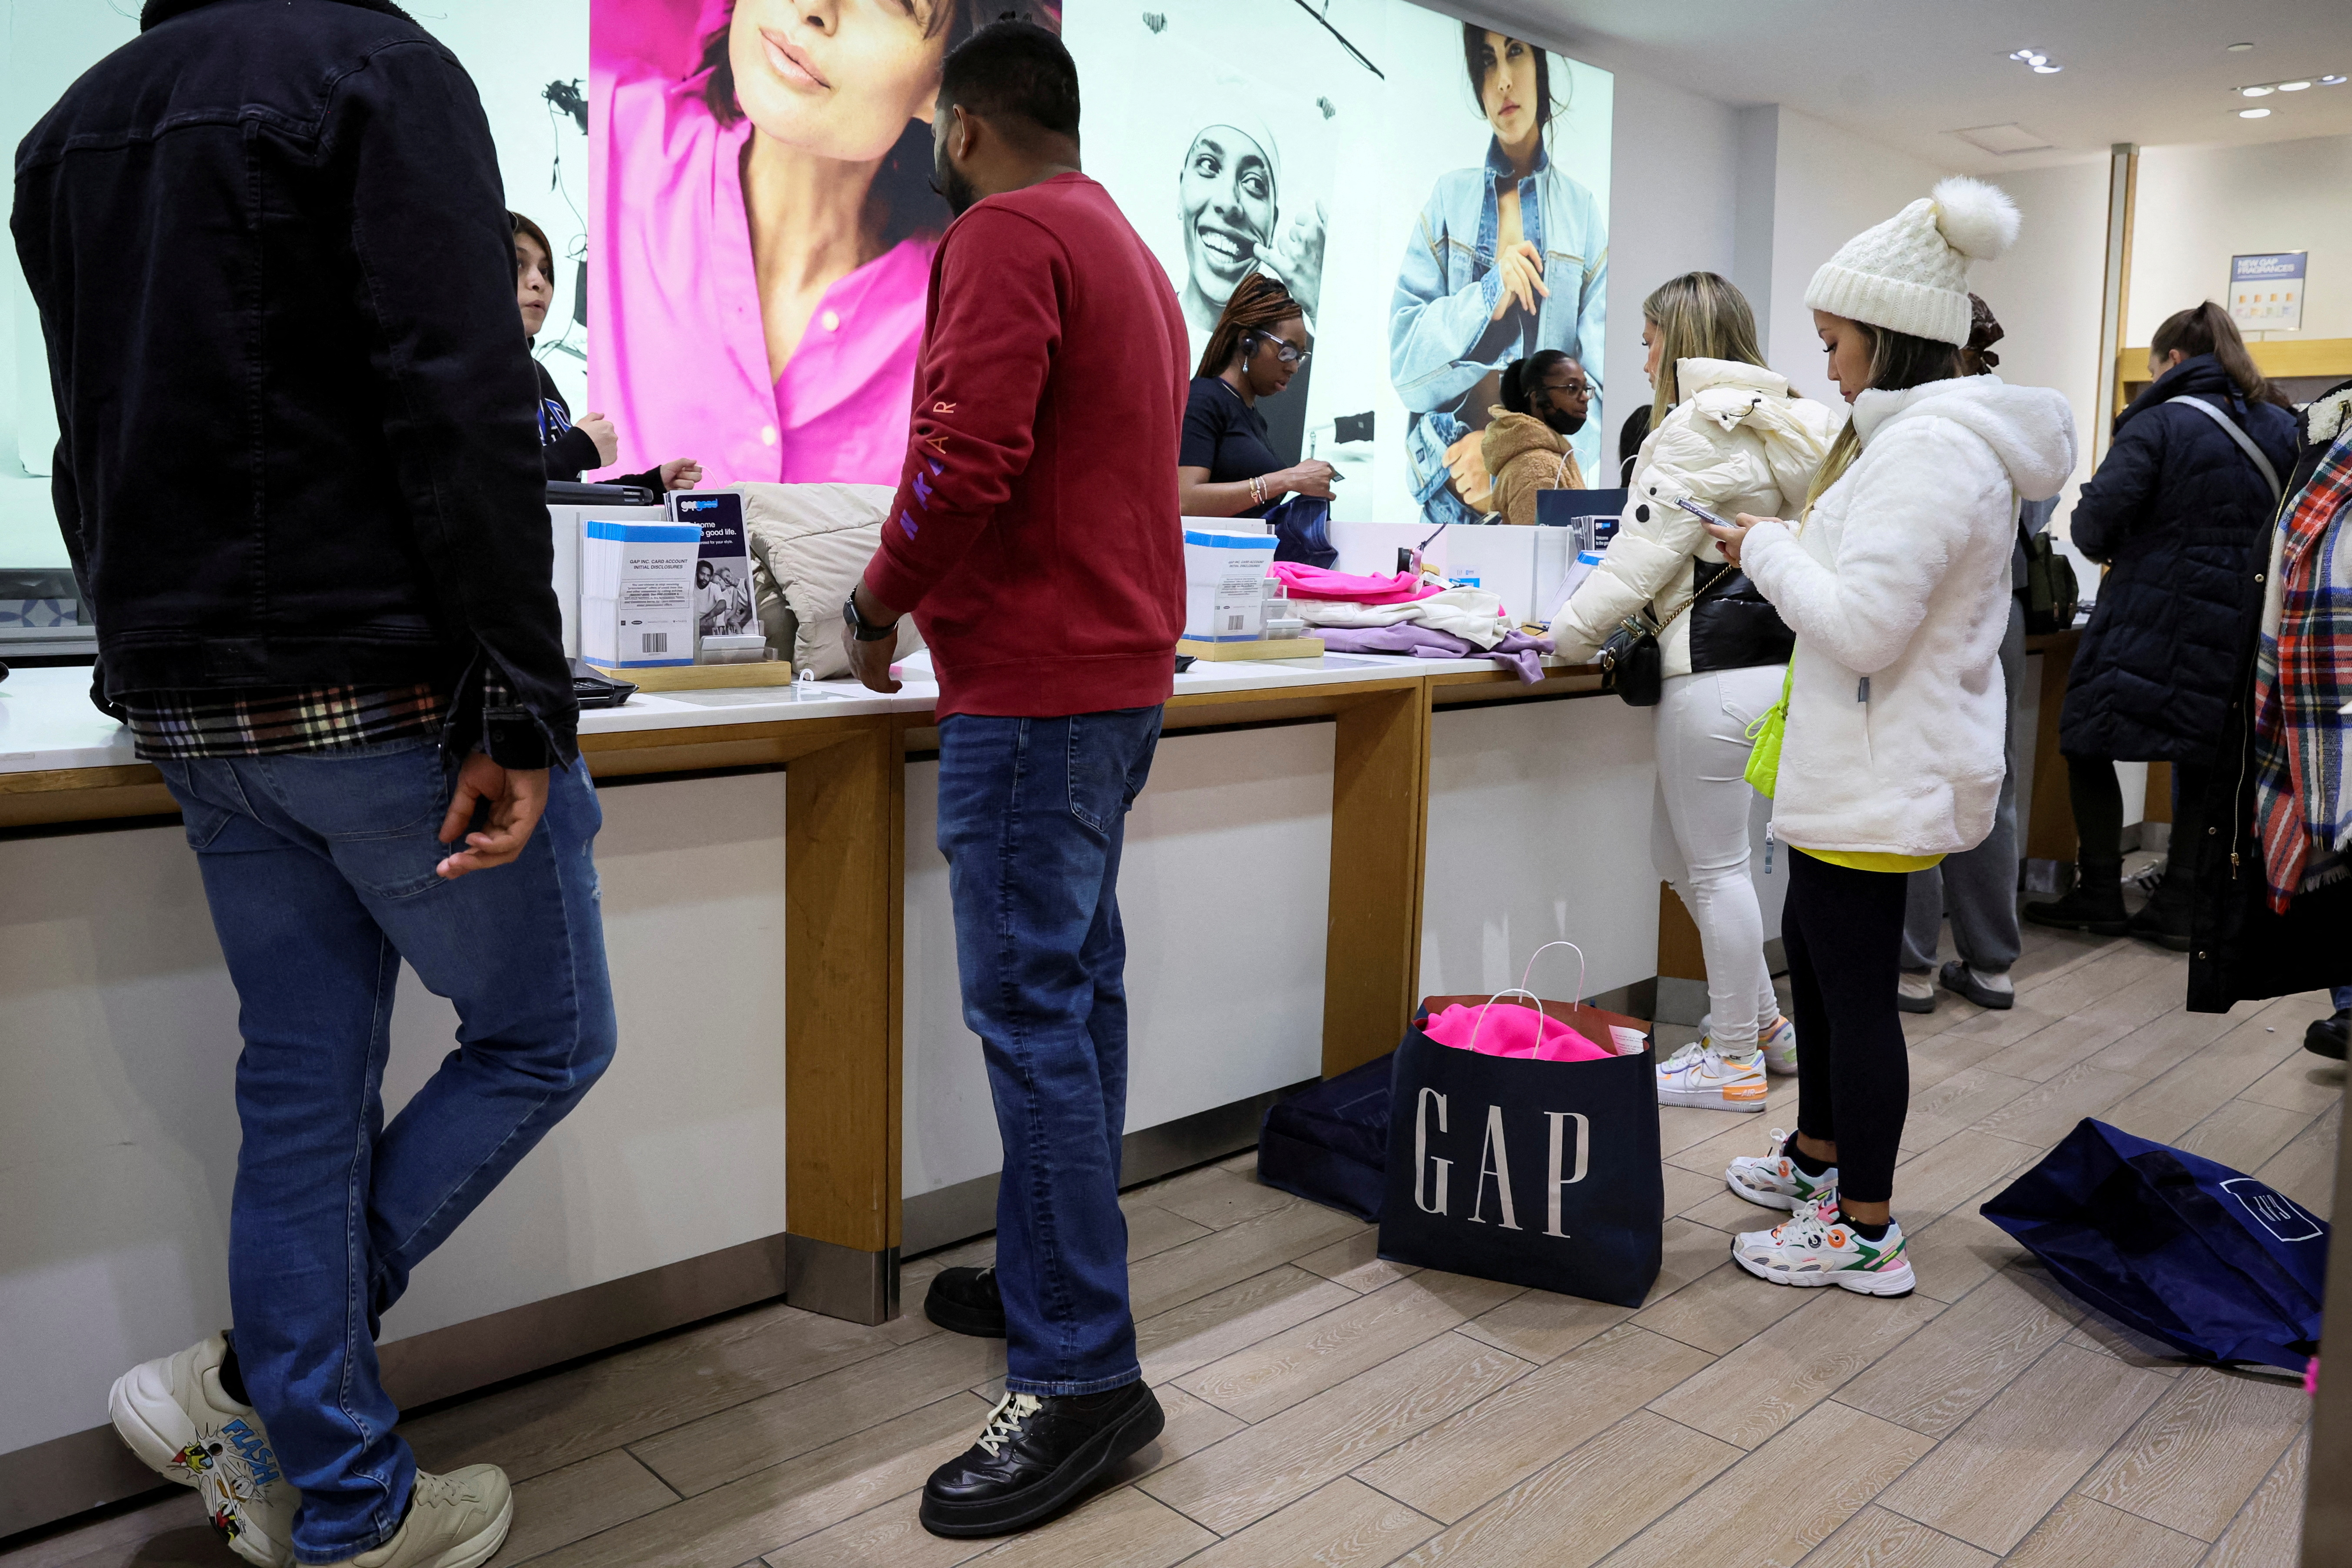 Shoppers look for early Black Friday sales at a Gap Store in Times Square on the Thanksgiving holiday in New York